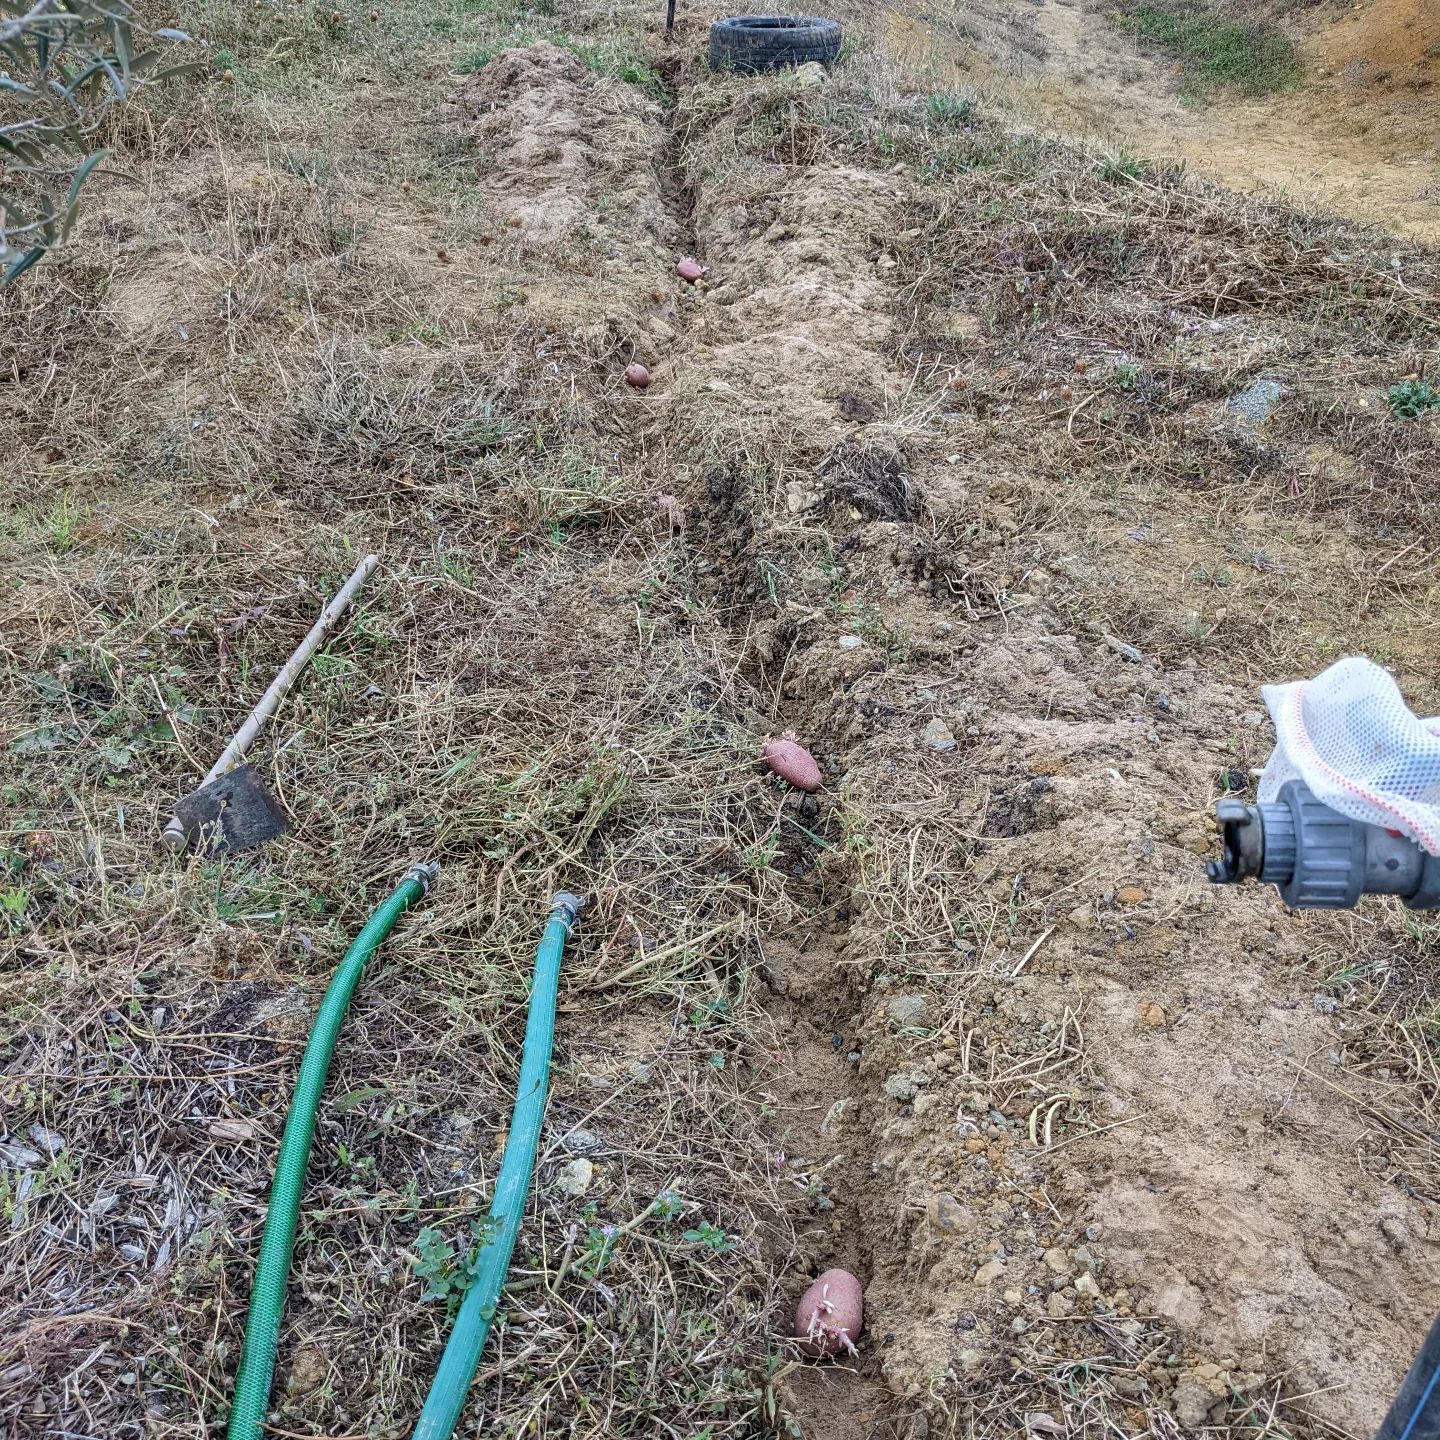 Some potatoes that sprouted in the cupboard going into the trench left by digging up the old irrigation mainline